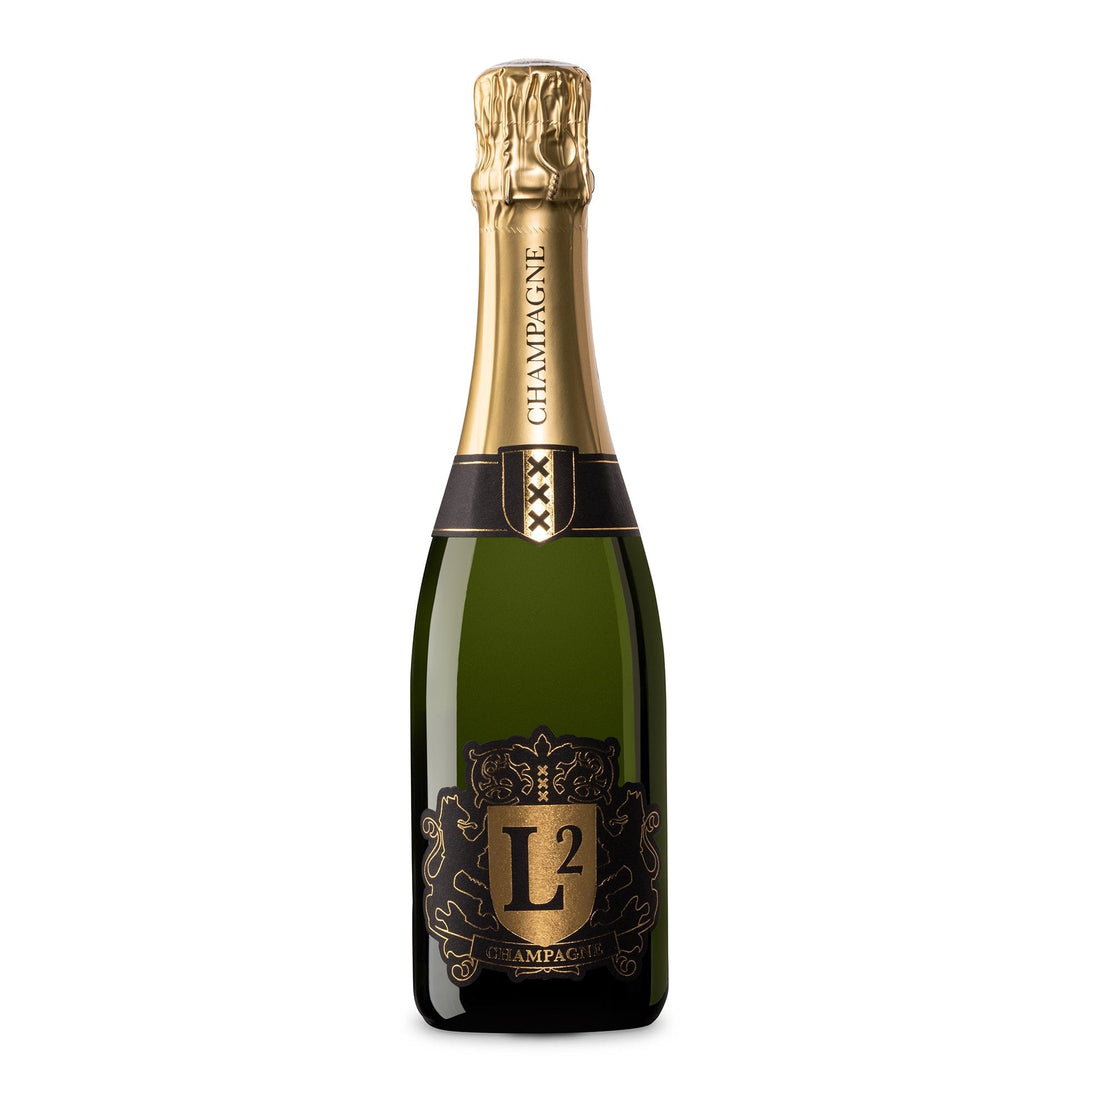 L2 Champagne Brut | Sustainable | Ecological